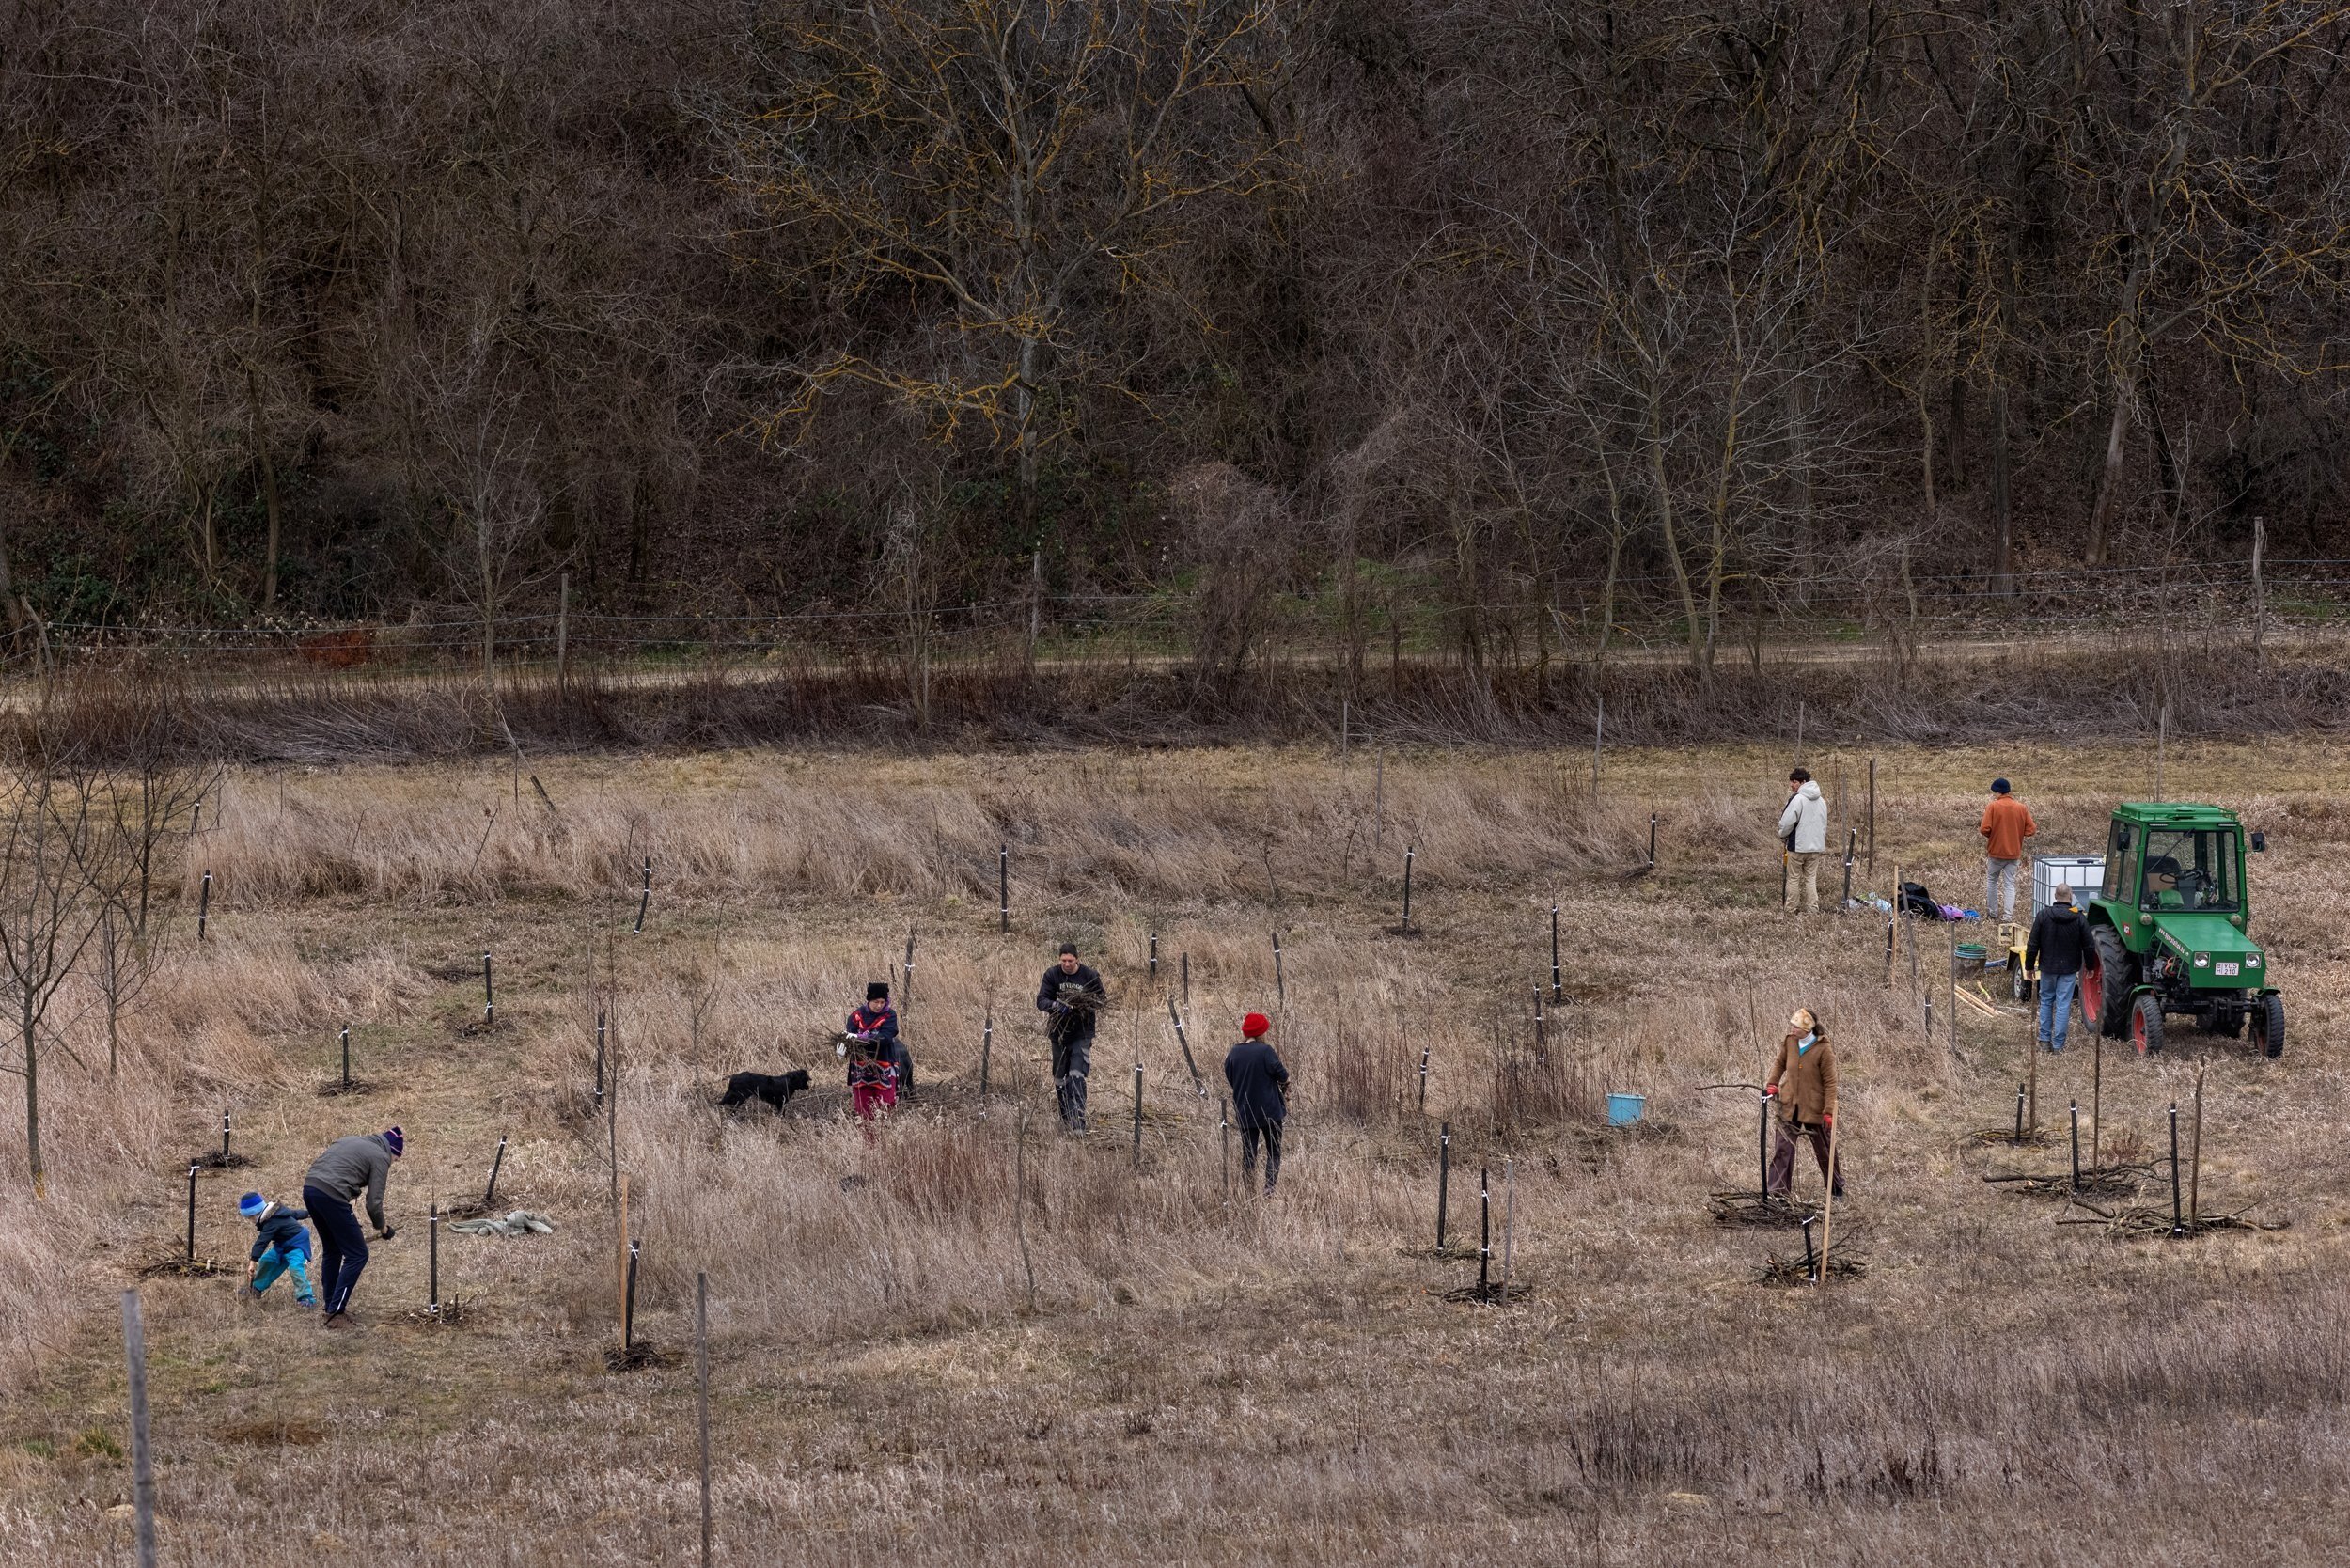  The Nyim Eco Community and volunteers planting a tree on the Eco-meadow on February 19, 2022. As a result of ten years of systematic work, the group has succeeded in establishing several groves and orchards on their jointly owned Eco-meadow. Part of